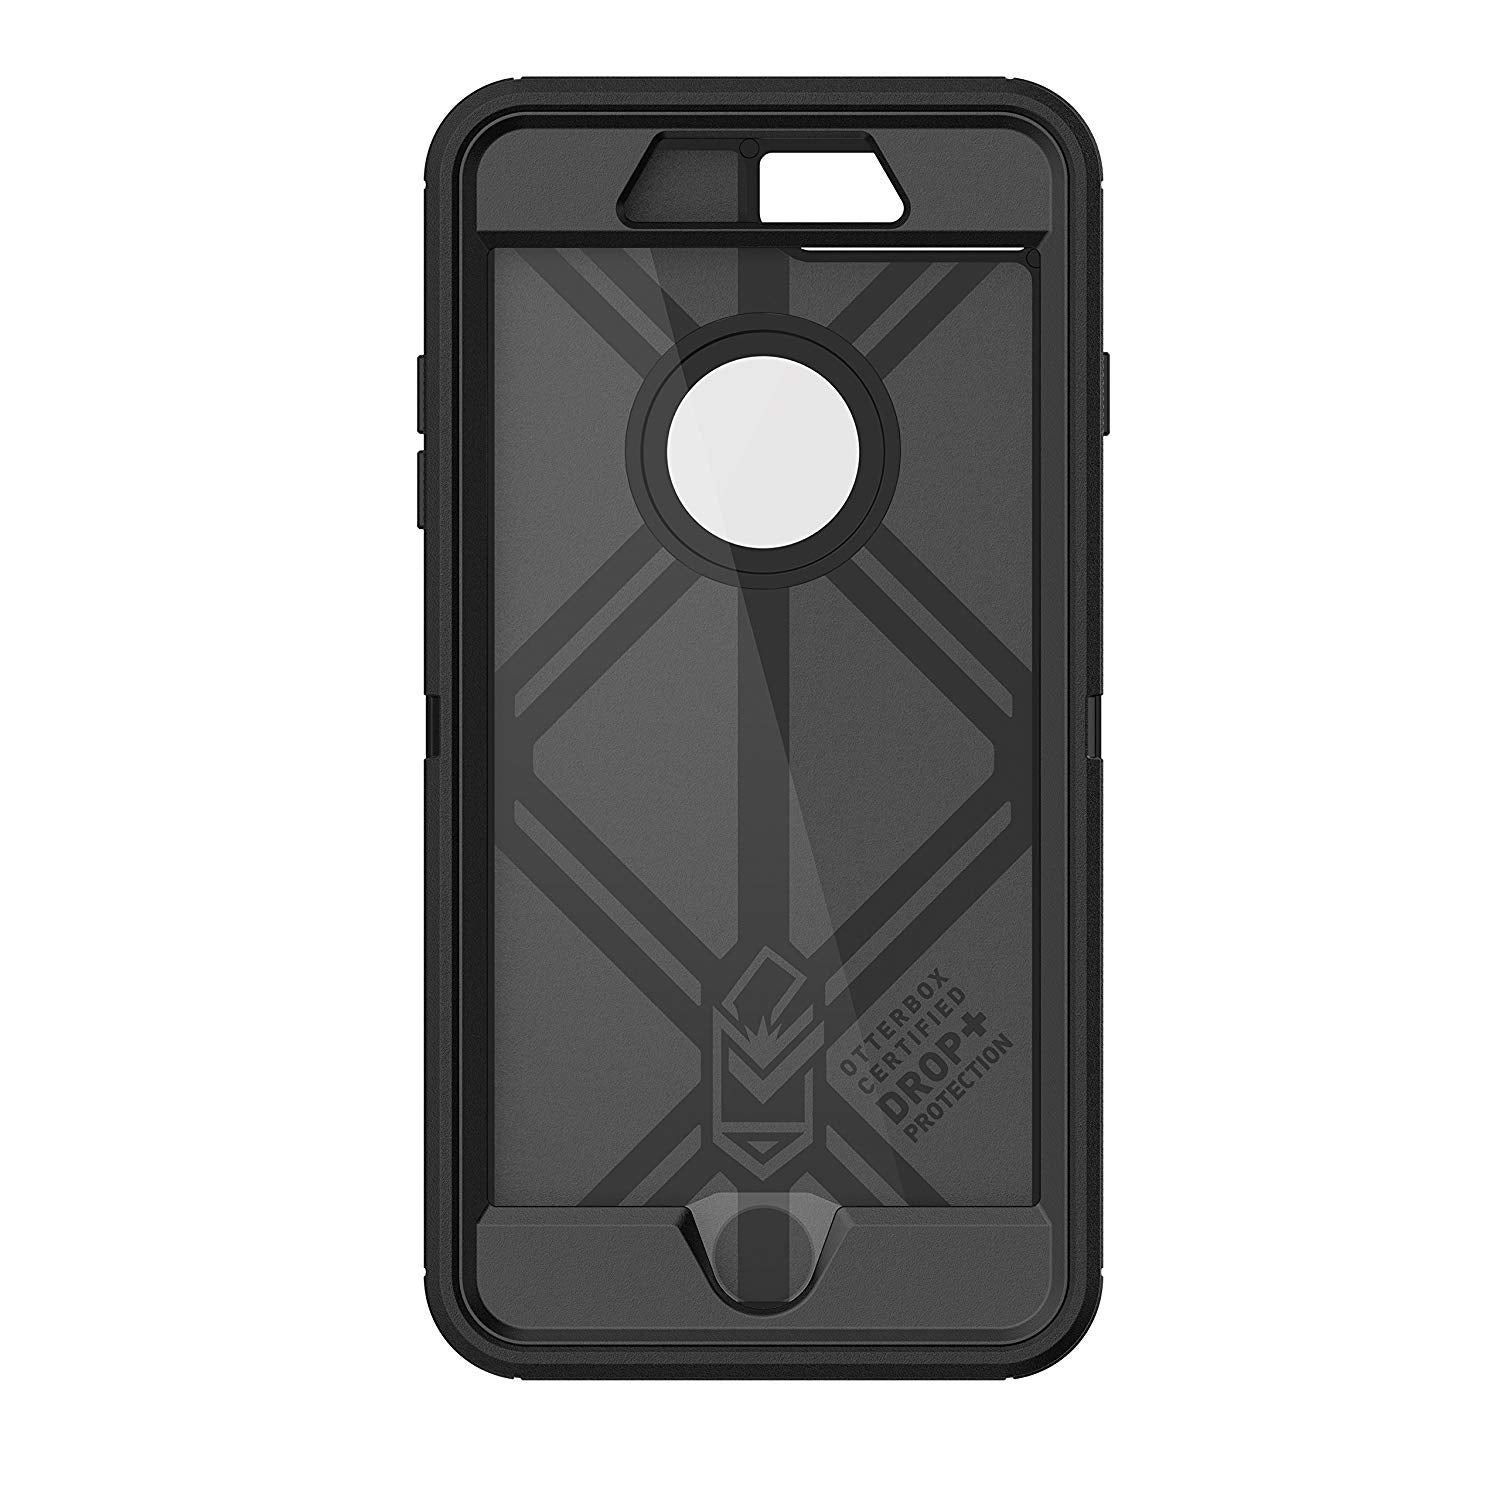 OtterBox DEFENDER SERIES Case &amp; Holster for iPhone 7 Plus/iPhone 8 Plus - Black (New)